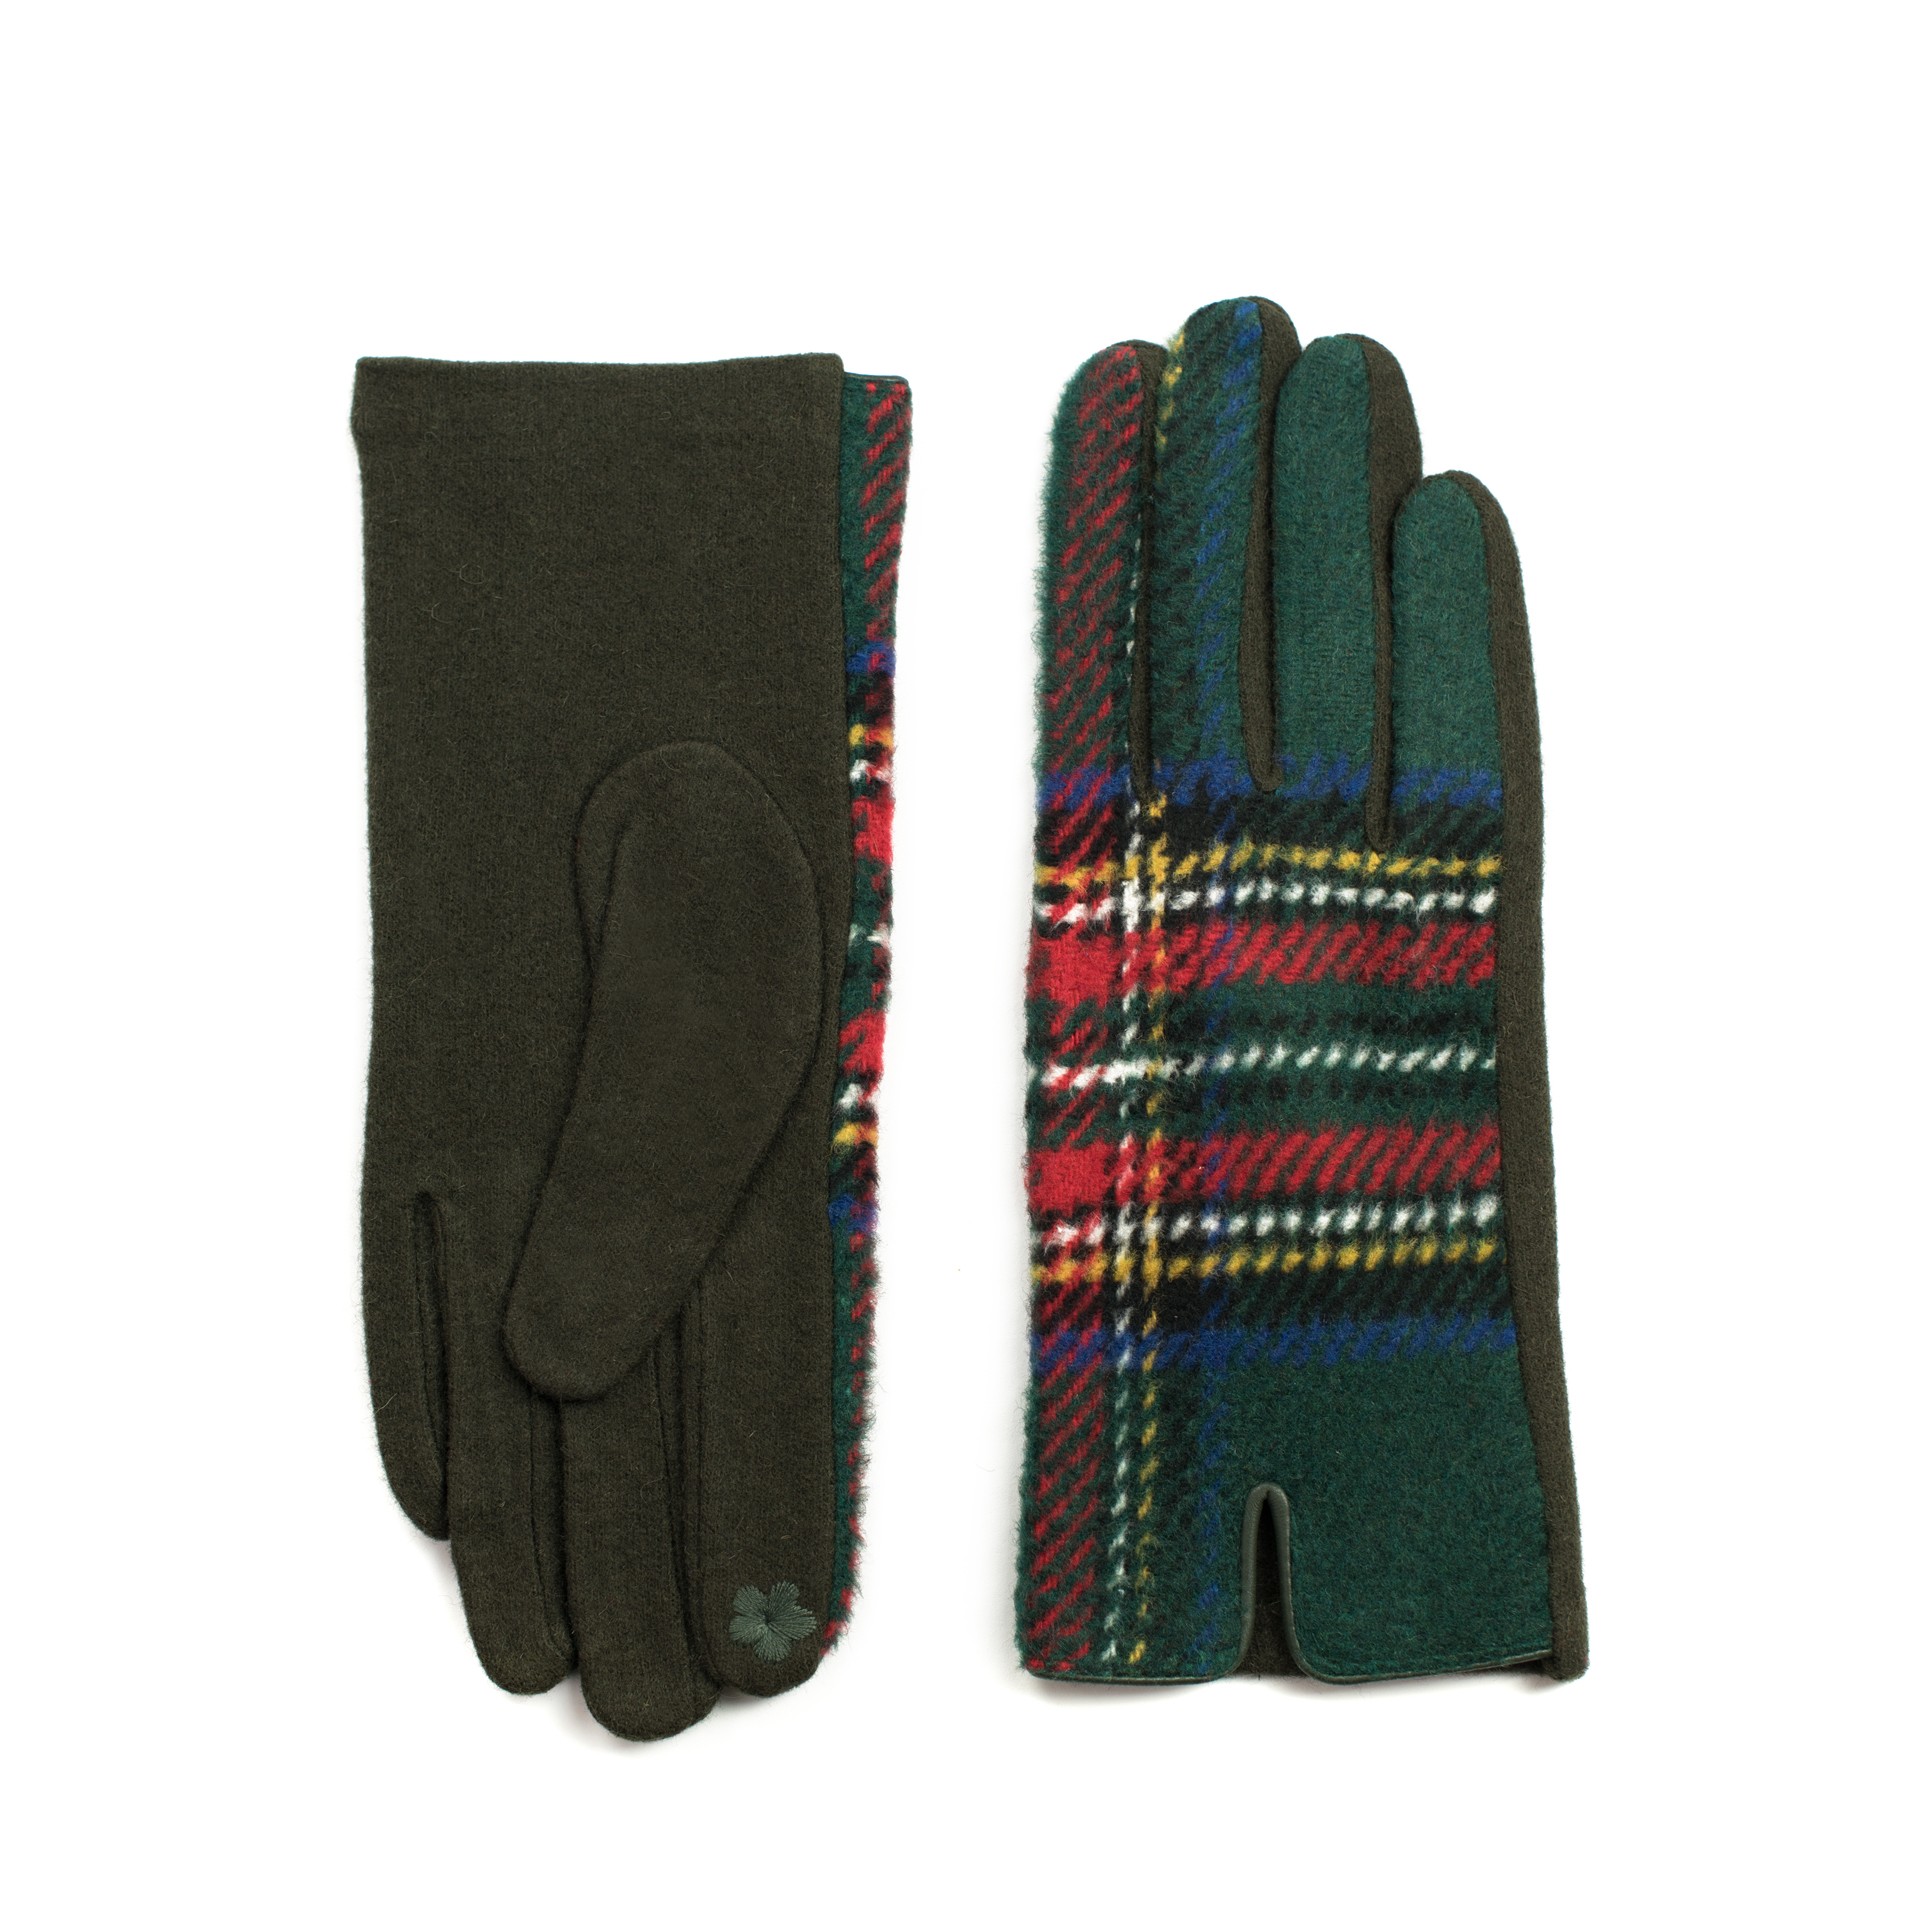 Art Of Polo Woman's Gloves Rk20317